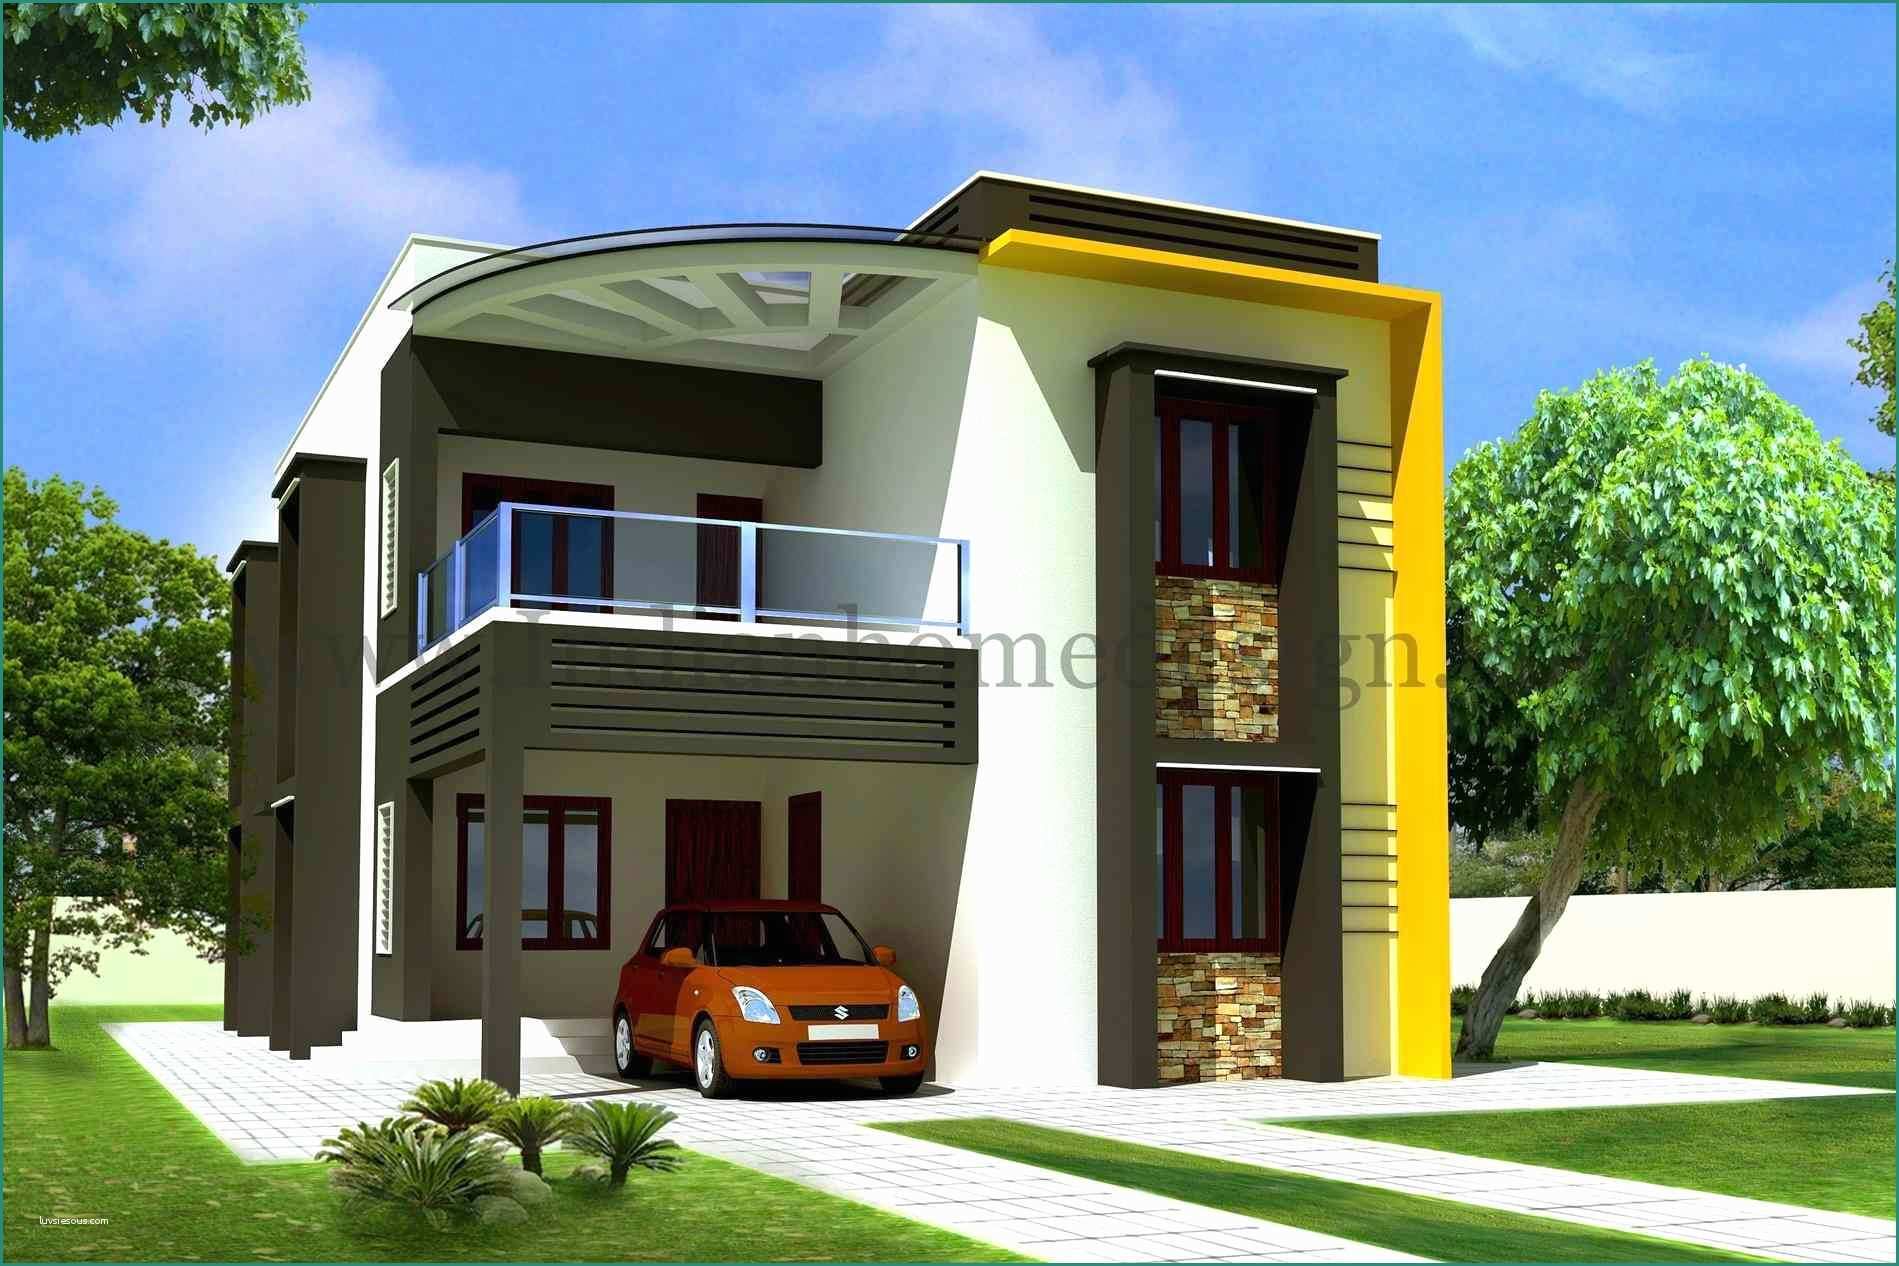 Poltrone Design Low Cost E House Designs In Kerala Design Simple Low Cost House Plans